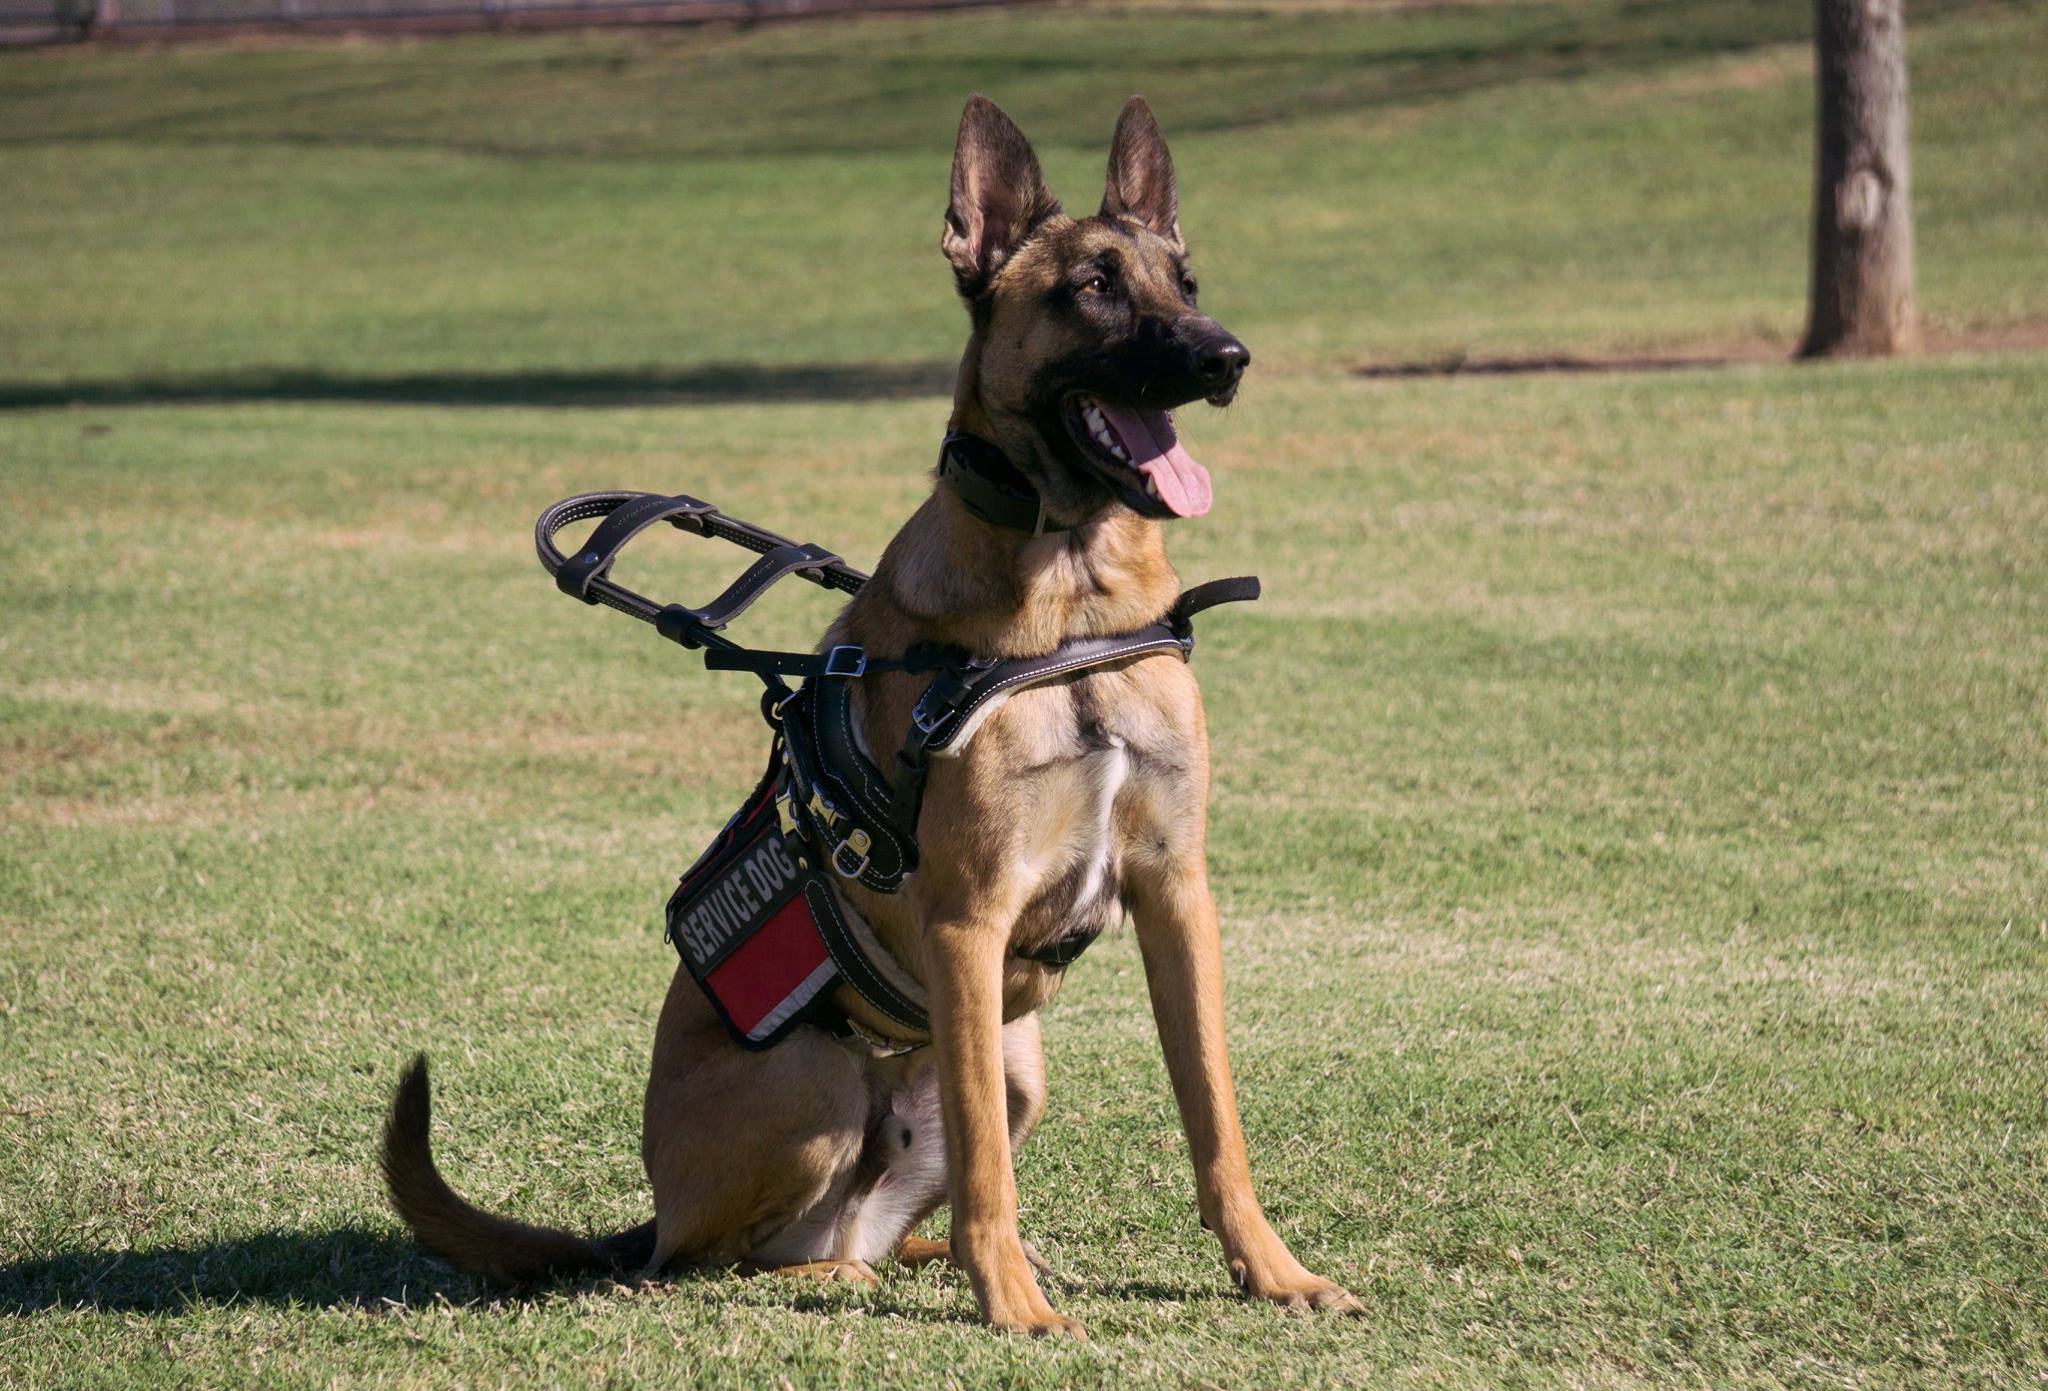 Spending Your Summer with a Service Dog in San Antonio